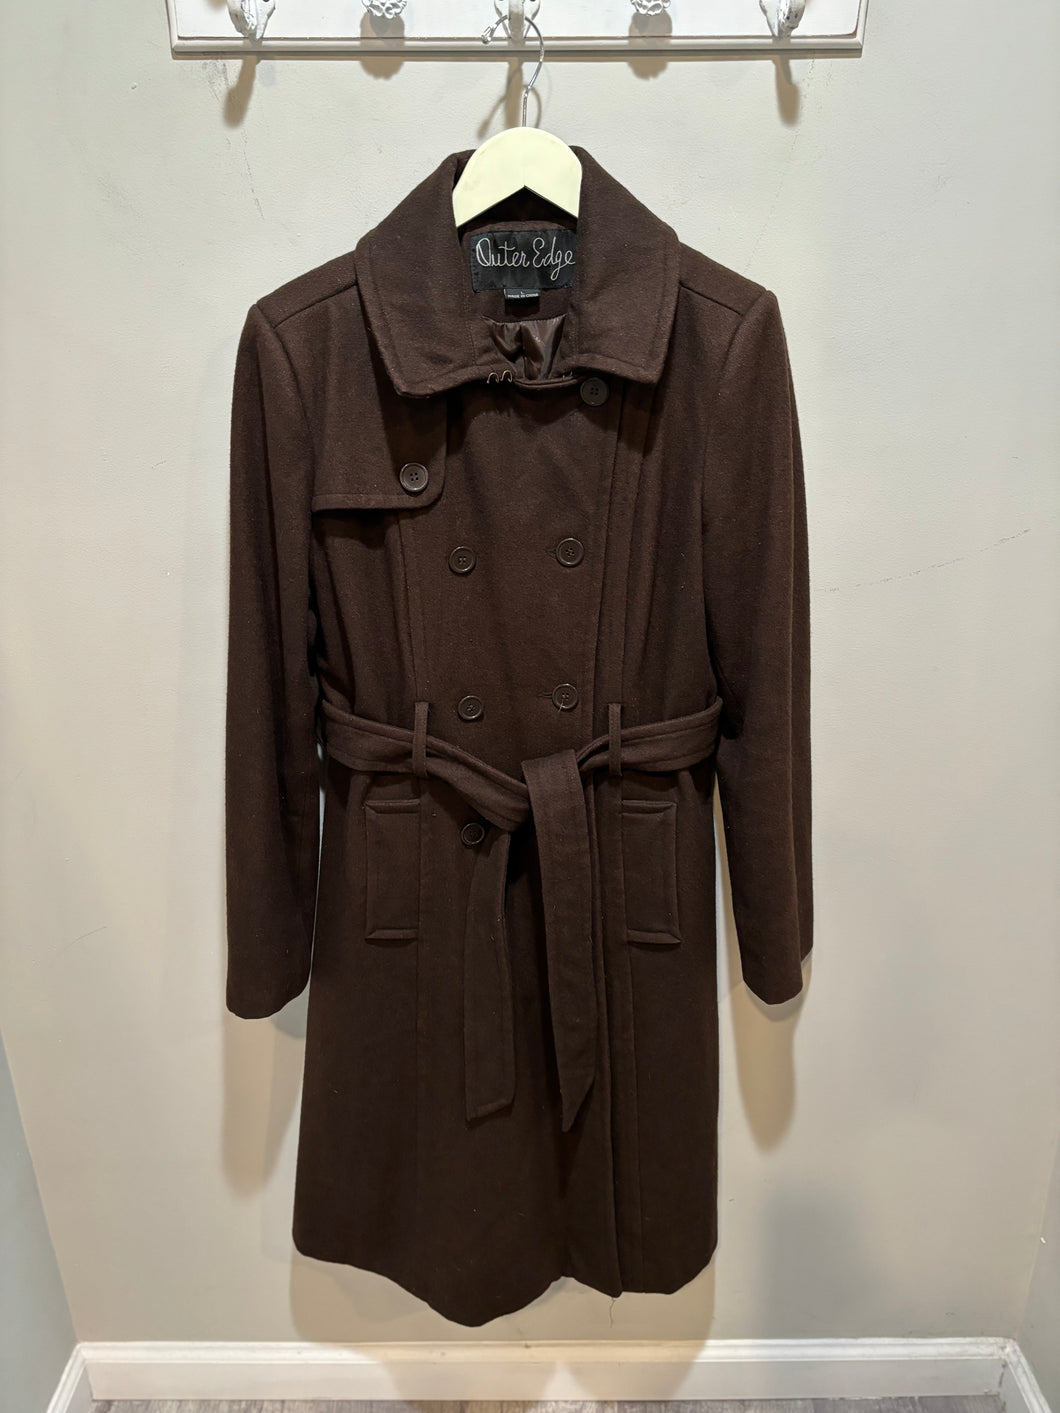 Outer edge Vintage Brown Double Breasted Coat